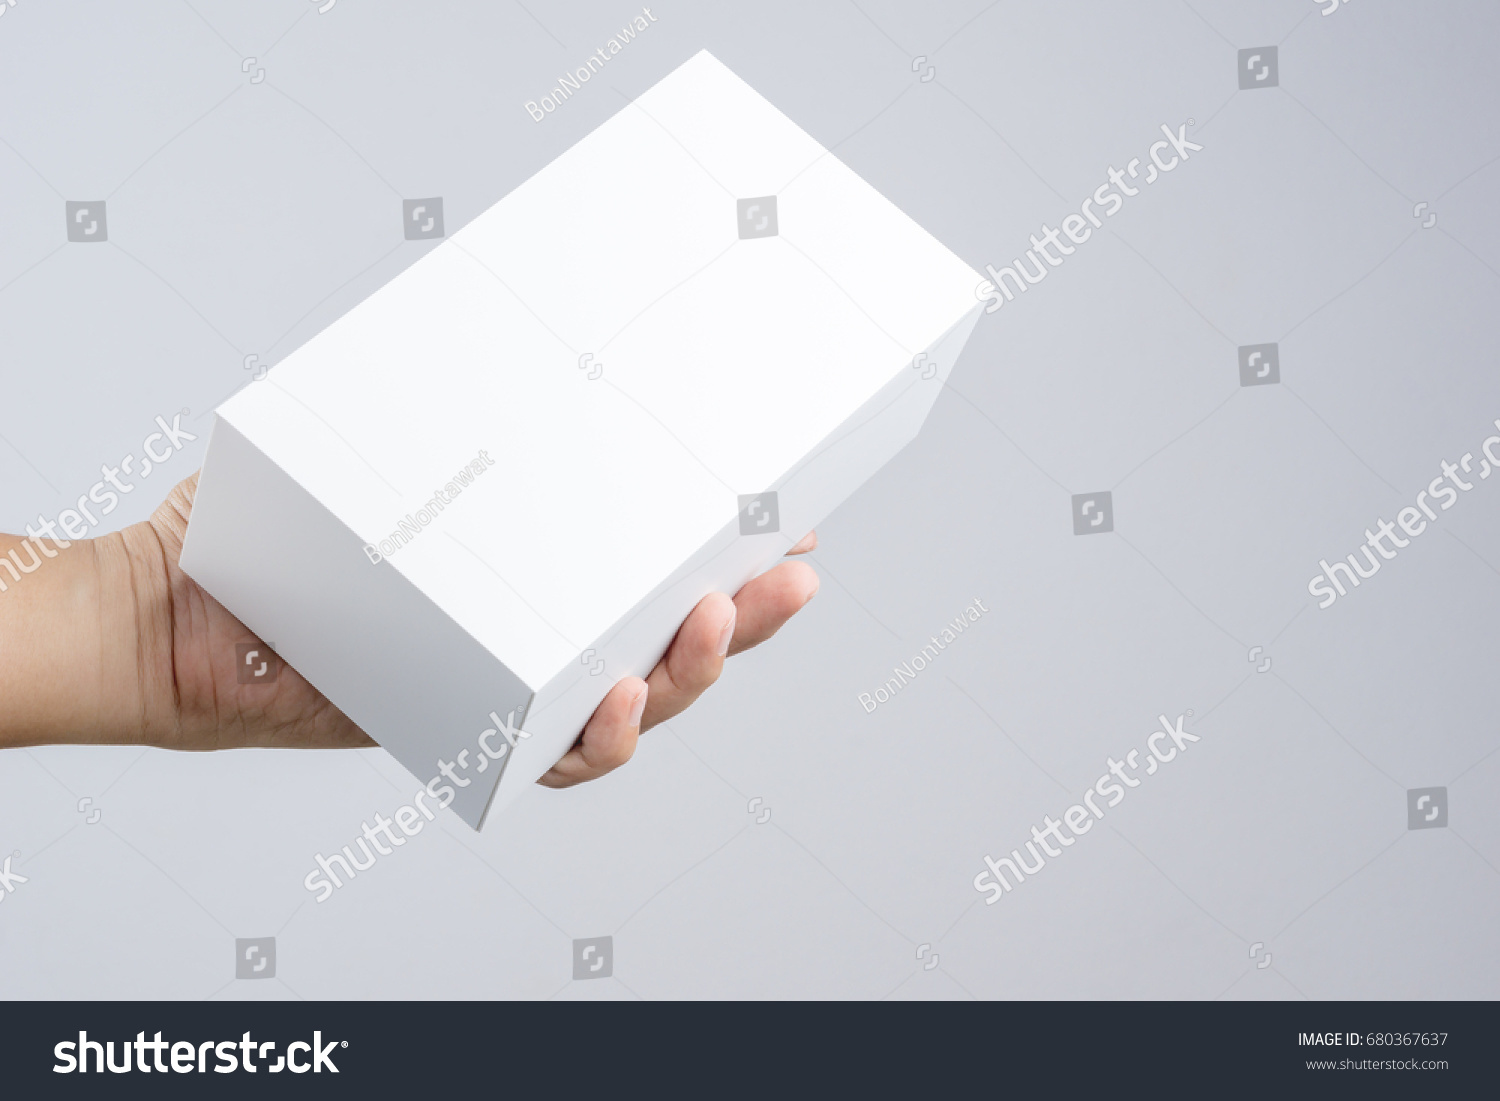 Hand holding blank white box give gift on white background #680367637